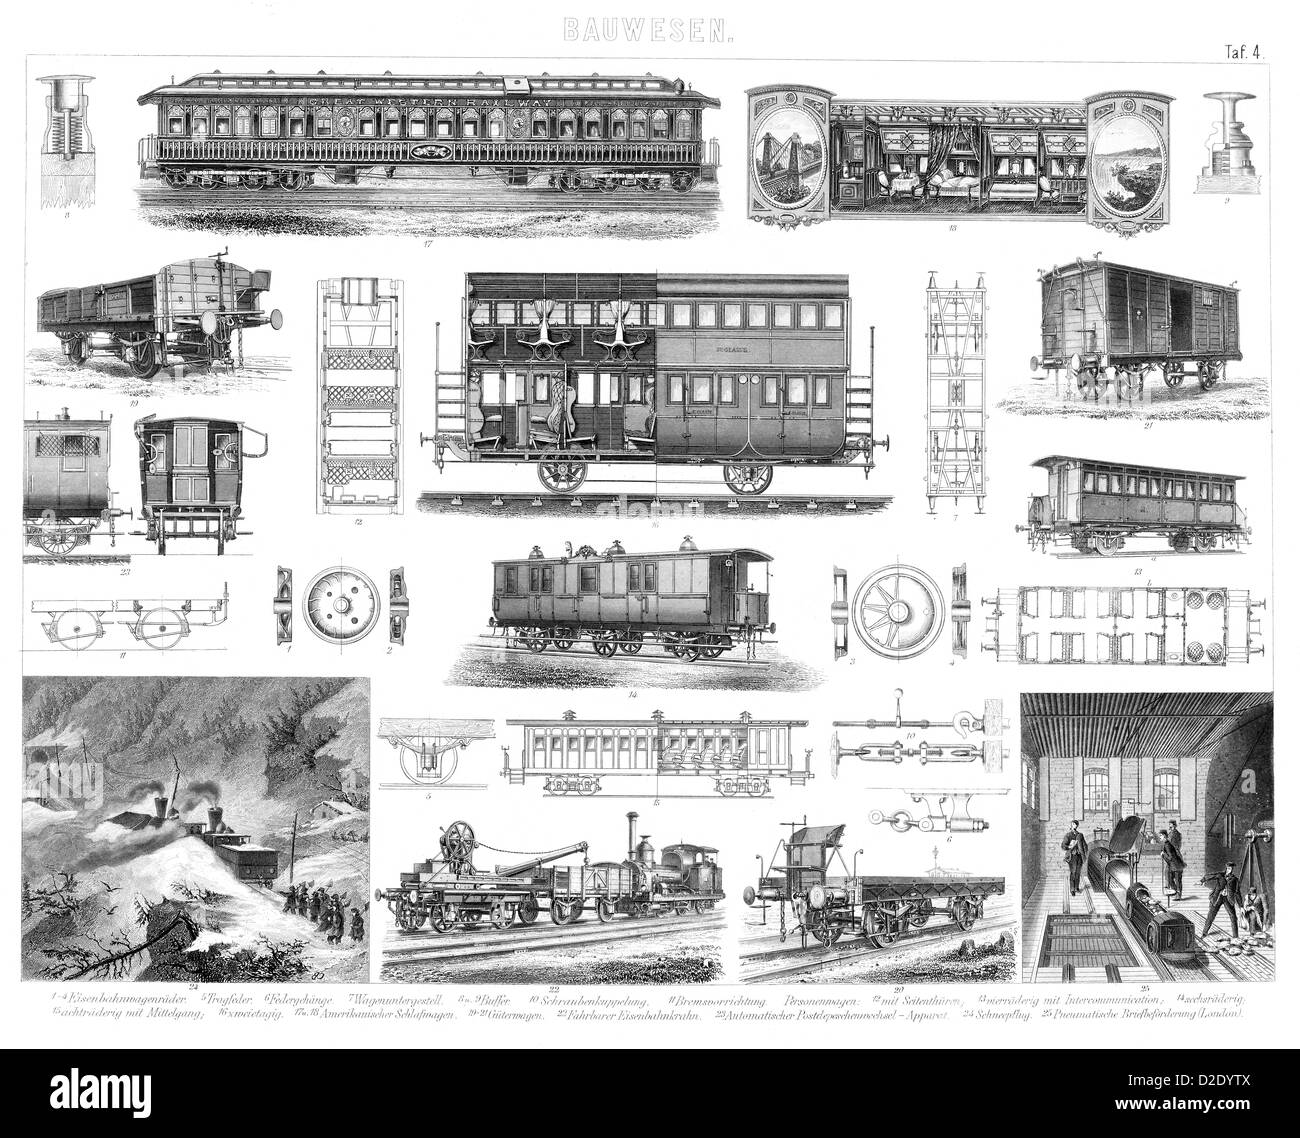 Vintage Railway Trains and Carriages from the 19th Century Stock Photo